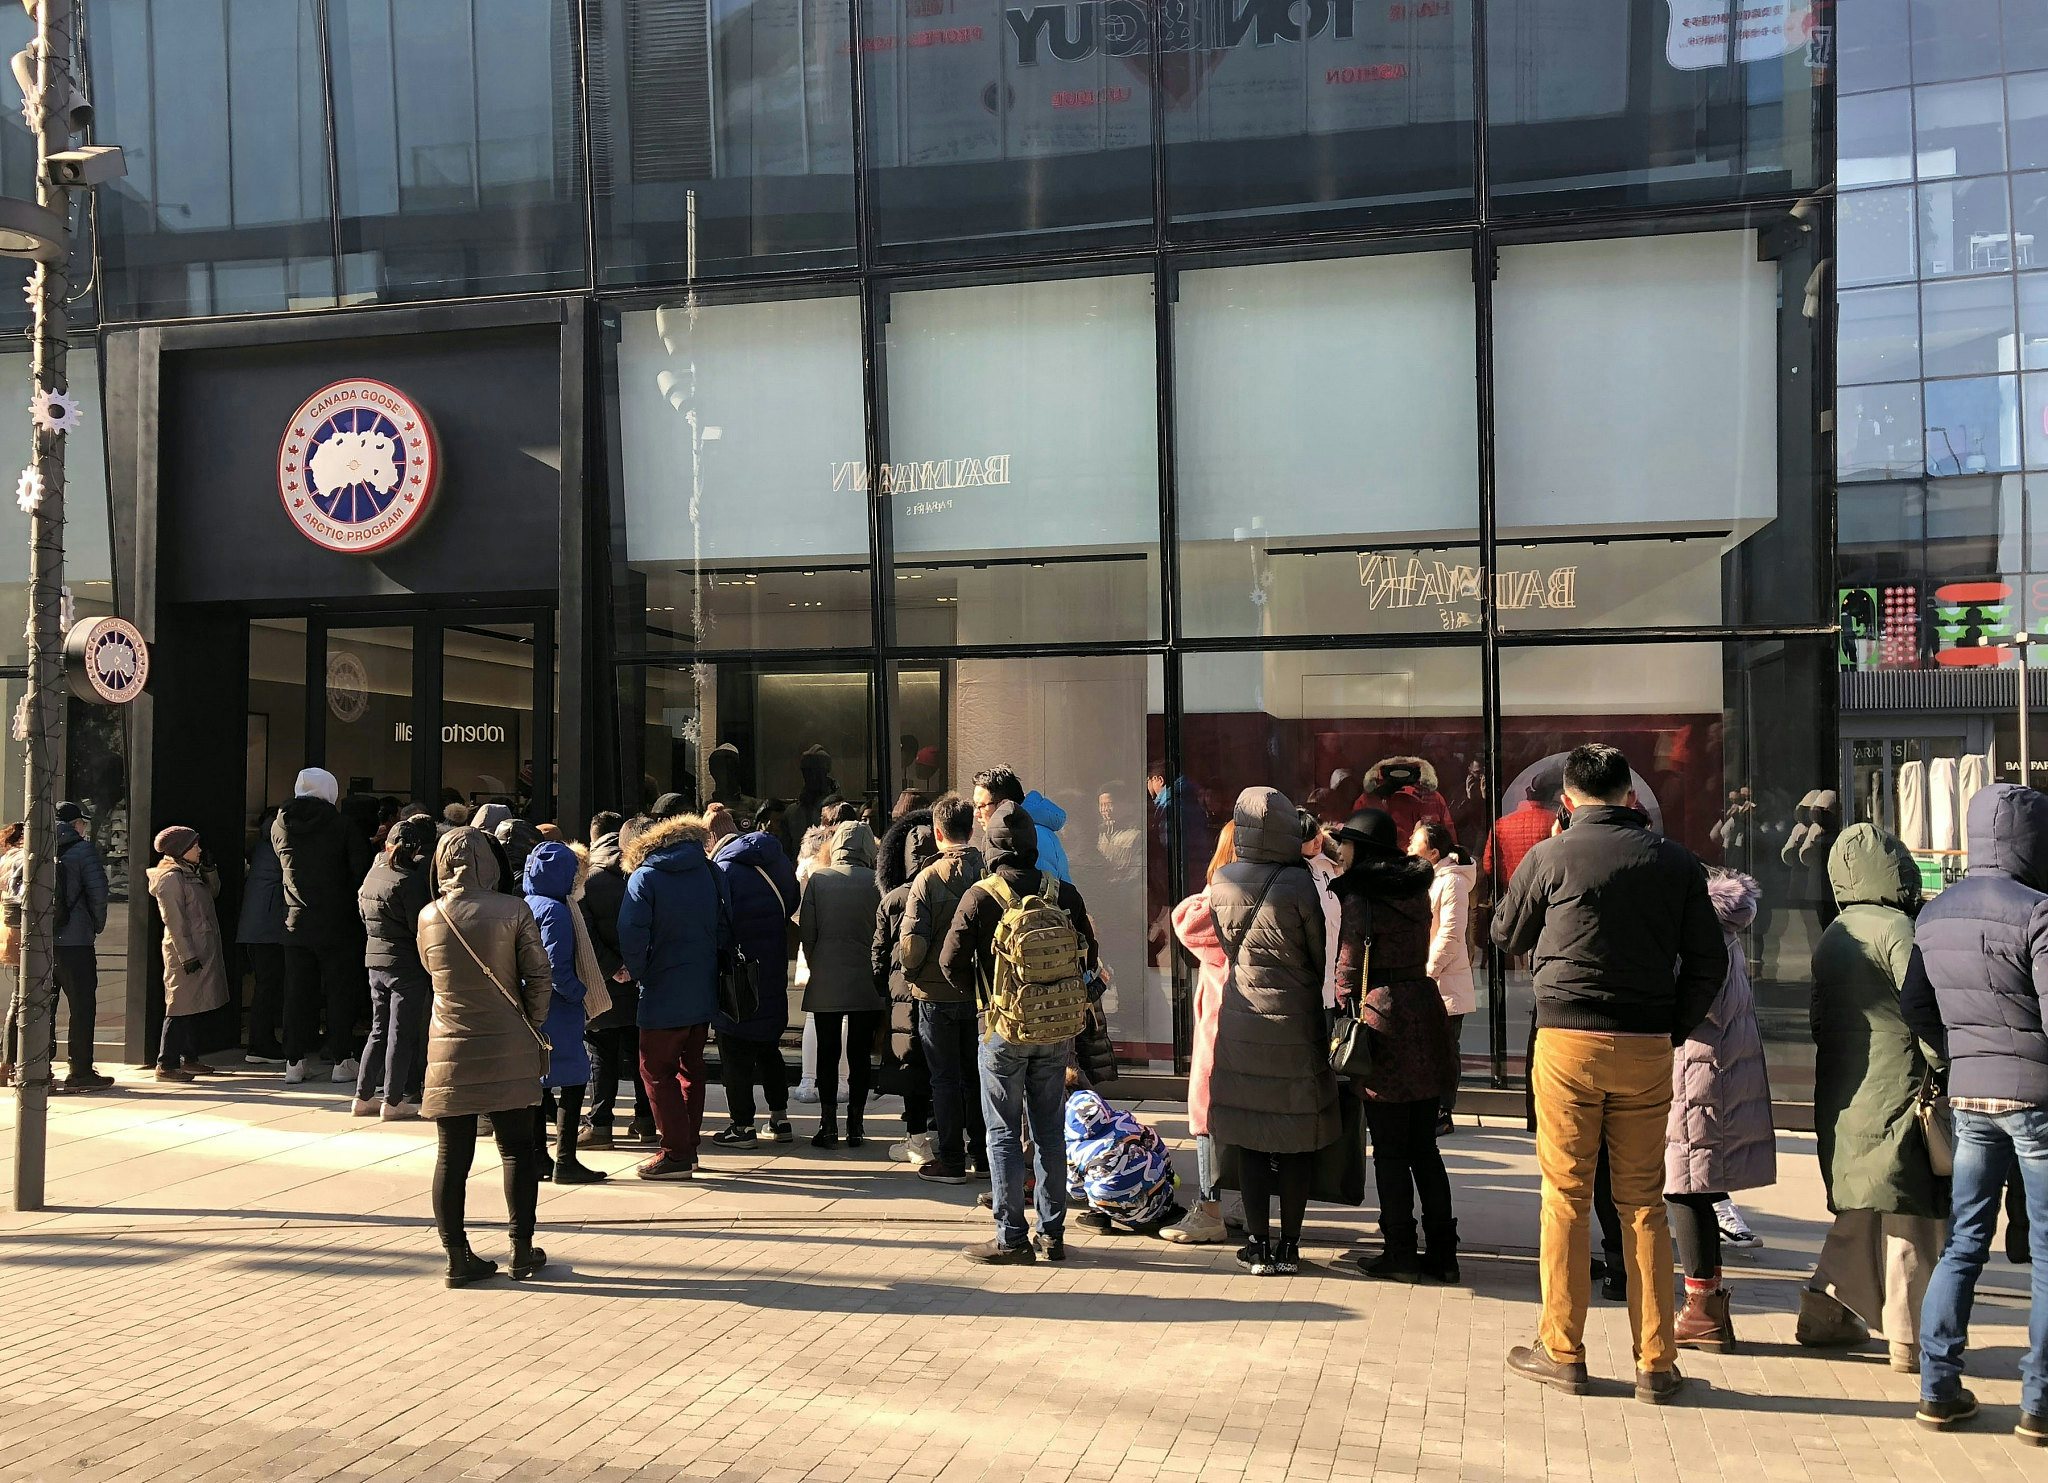 Many Chinese consumers flocked to Canada Goose's first Chinese store and waited in the cold winter for about an hour to get in. Photo: VCG